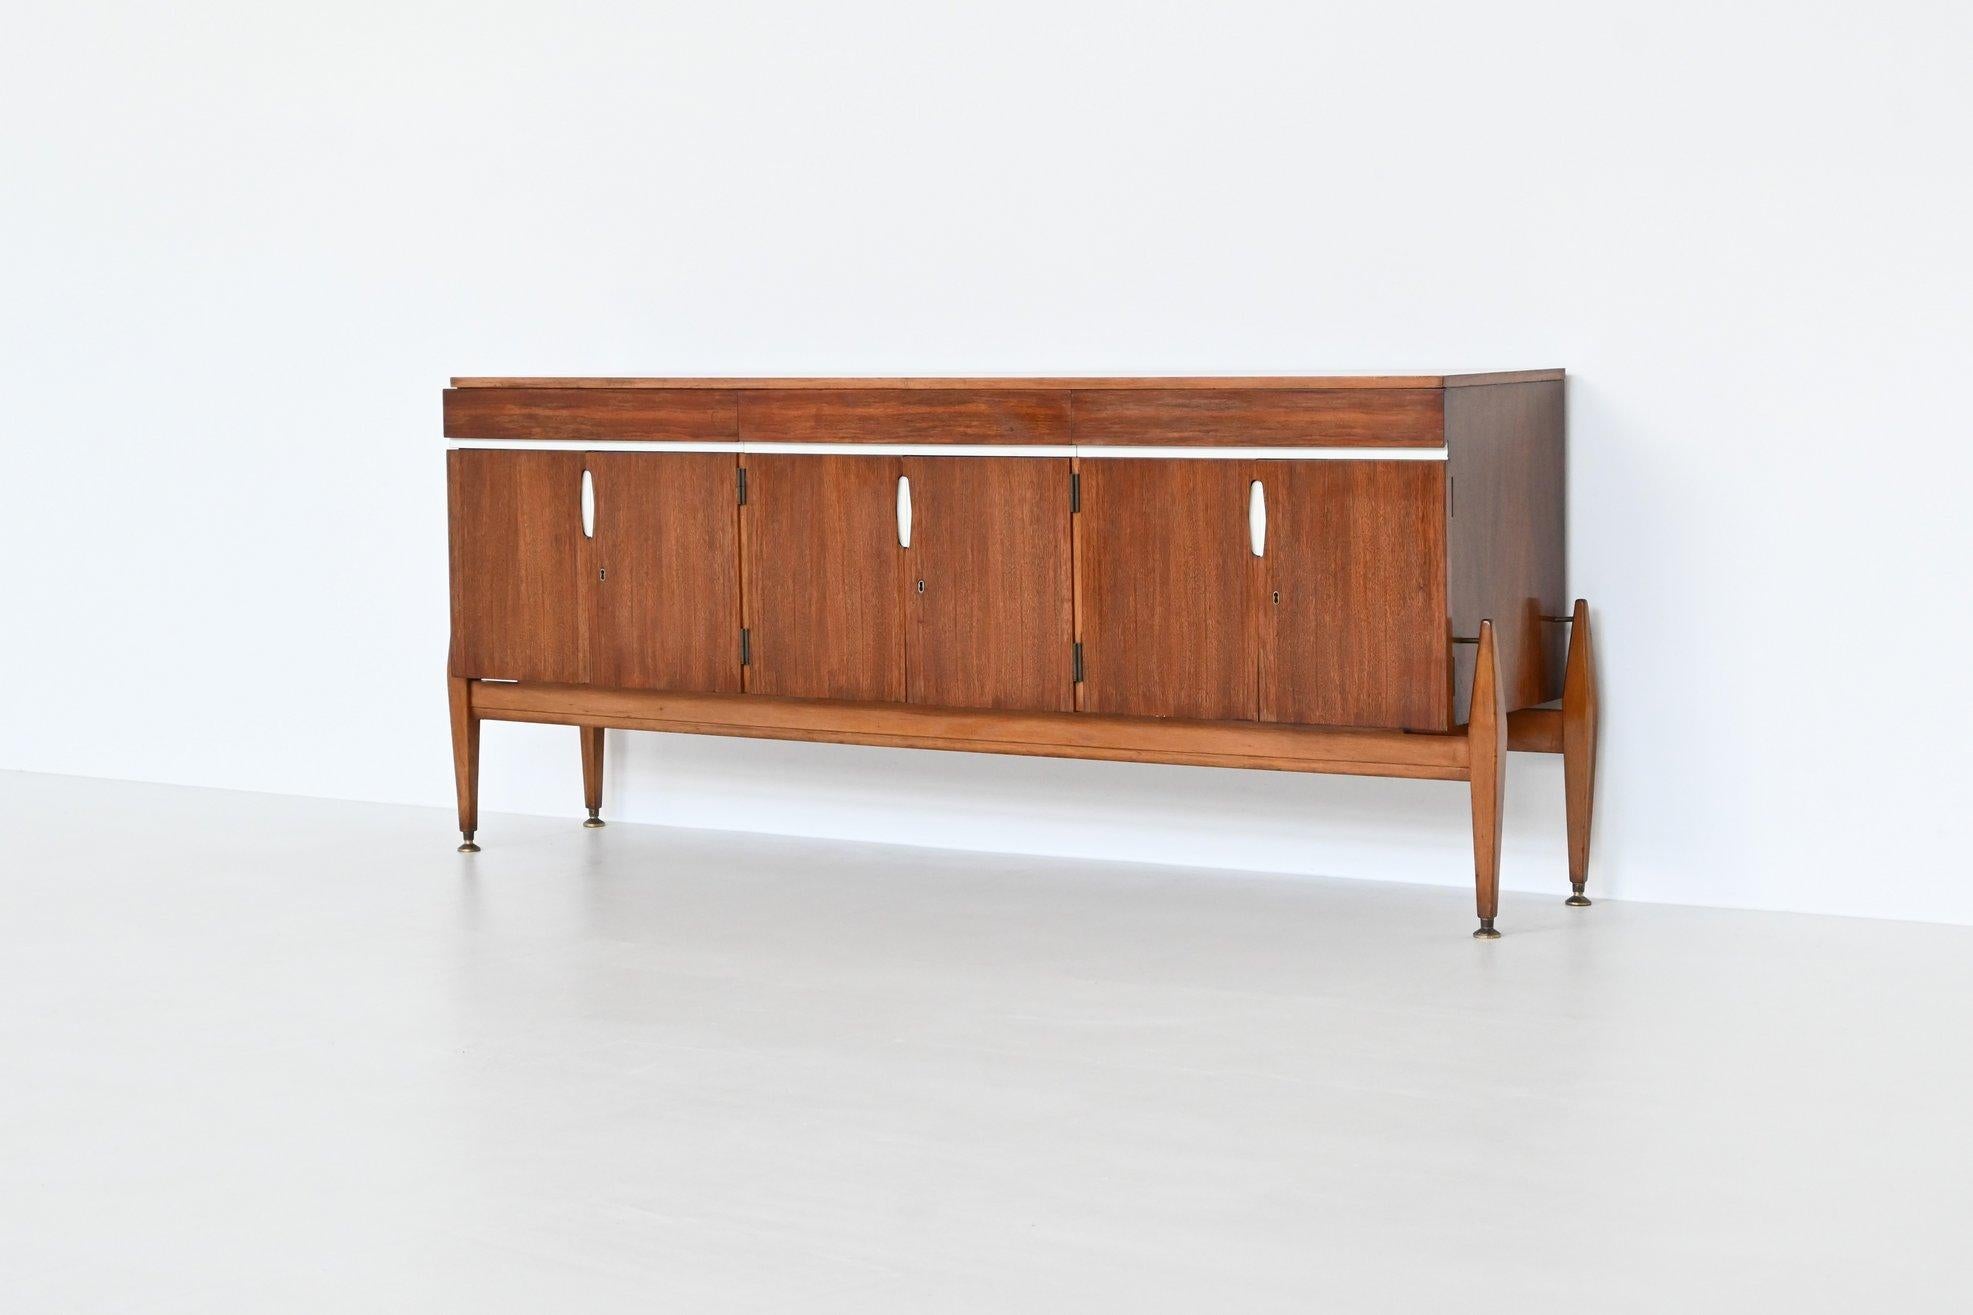 Beautiful shaped unusual sideboard by unknown designer or manufacturer, France 1960. This very nice symmetric sideboard is made of beautiful grained walnut wood. The cabinet is supported by a solid walnut wooden frame with tapered legs and brass